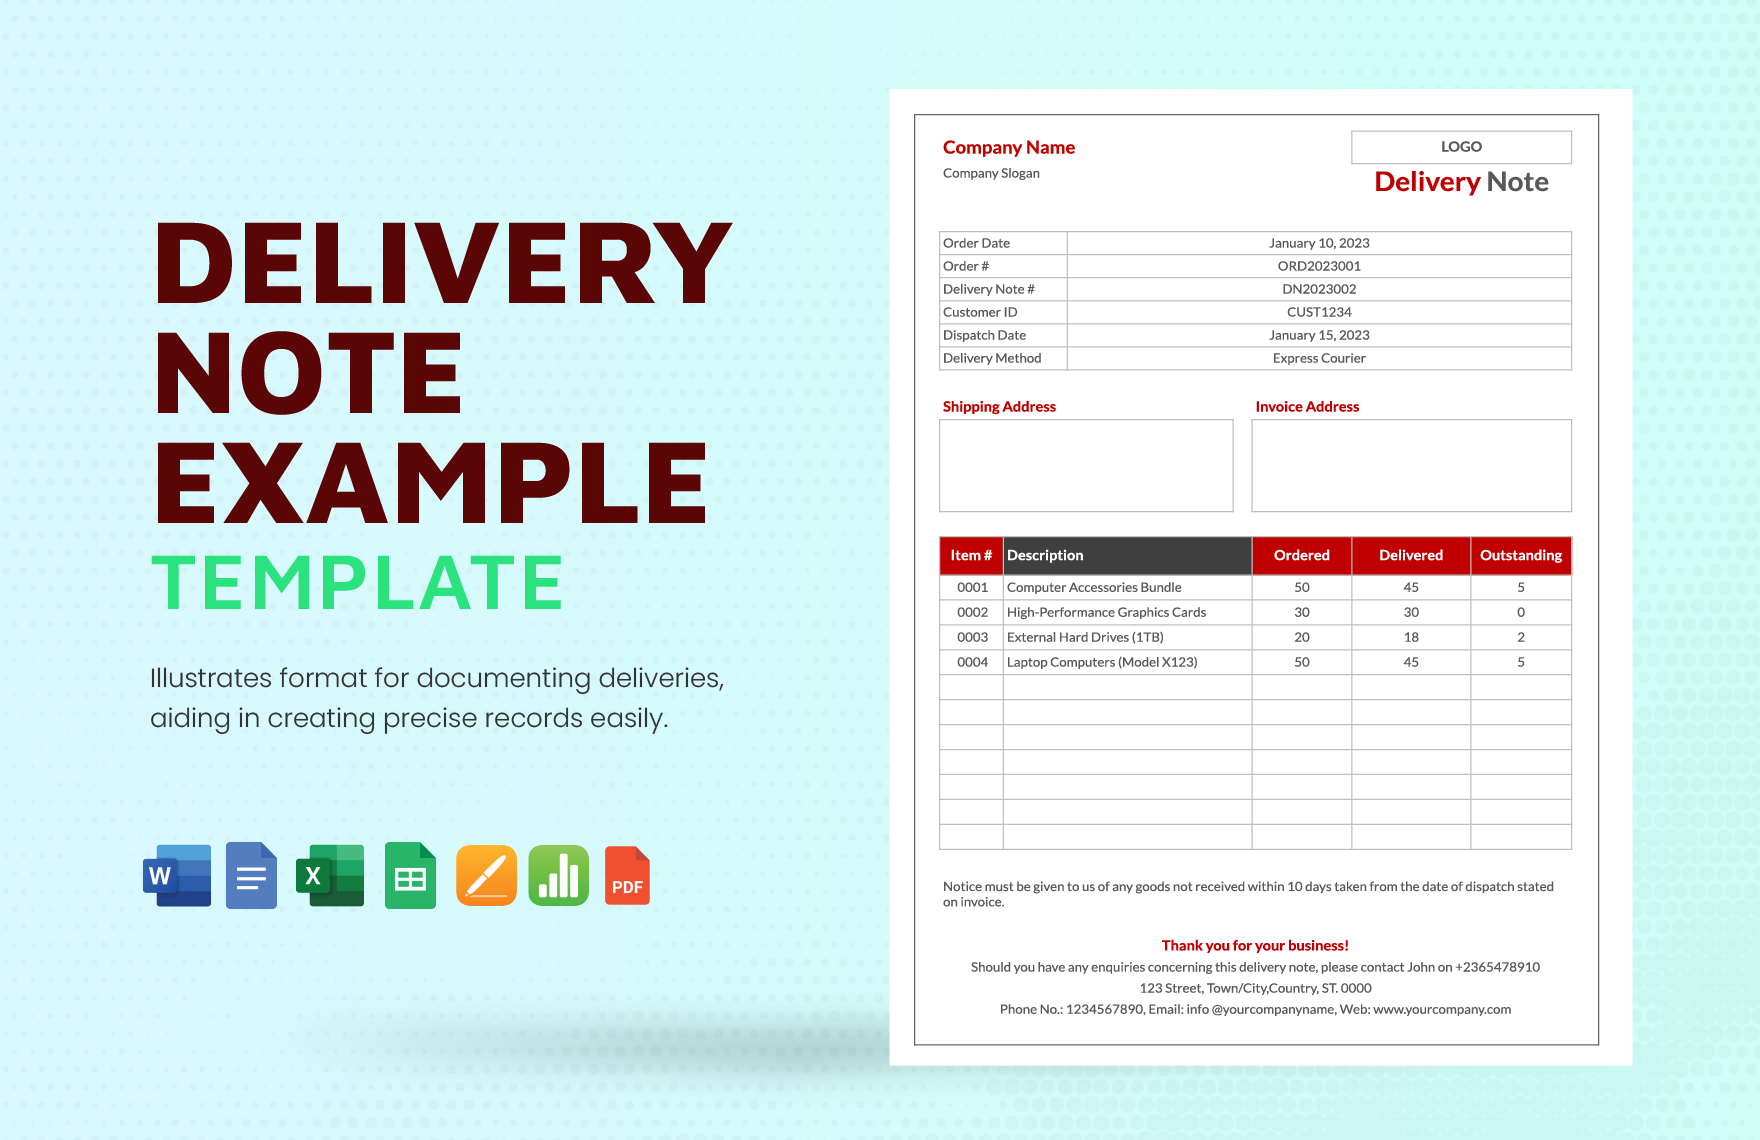 Delivery Note Example Template in Word, Google Docs, Excel, PDF, Google Sheets, Apple Pages, Apple Numbers